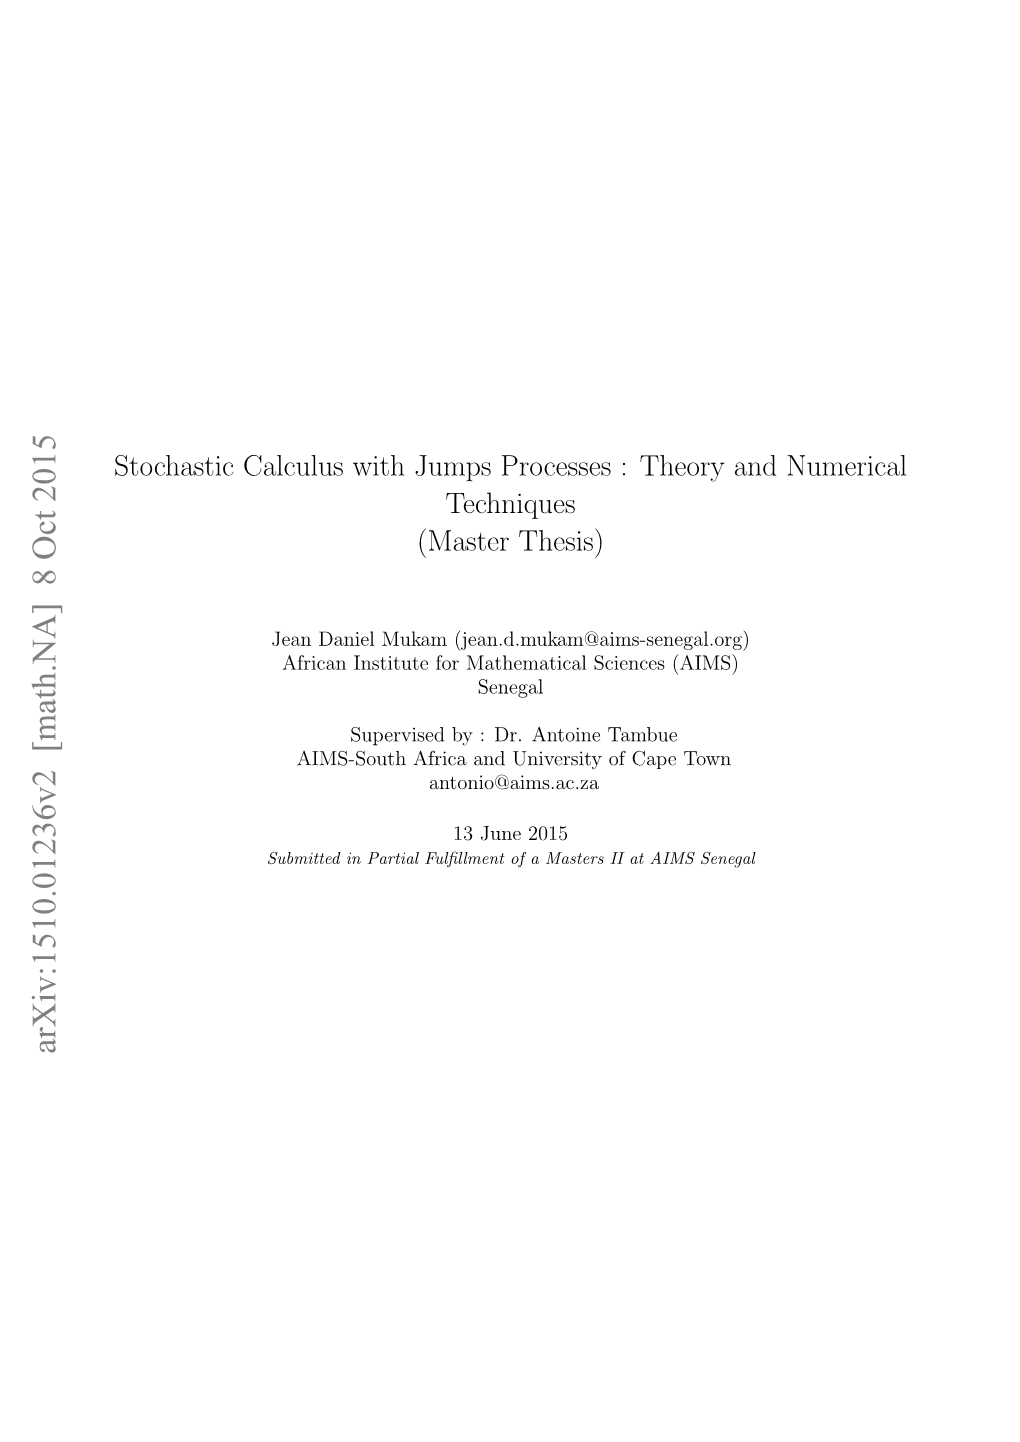 Stochastic Calculus with Jumps Processes : Theory and Numerical Techniques (Master Thesis)